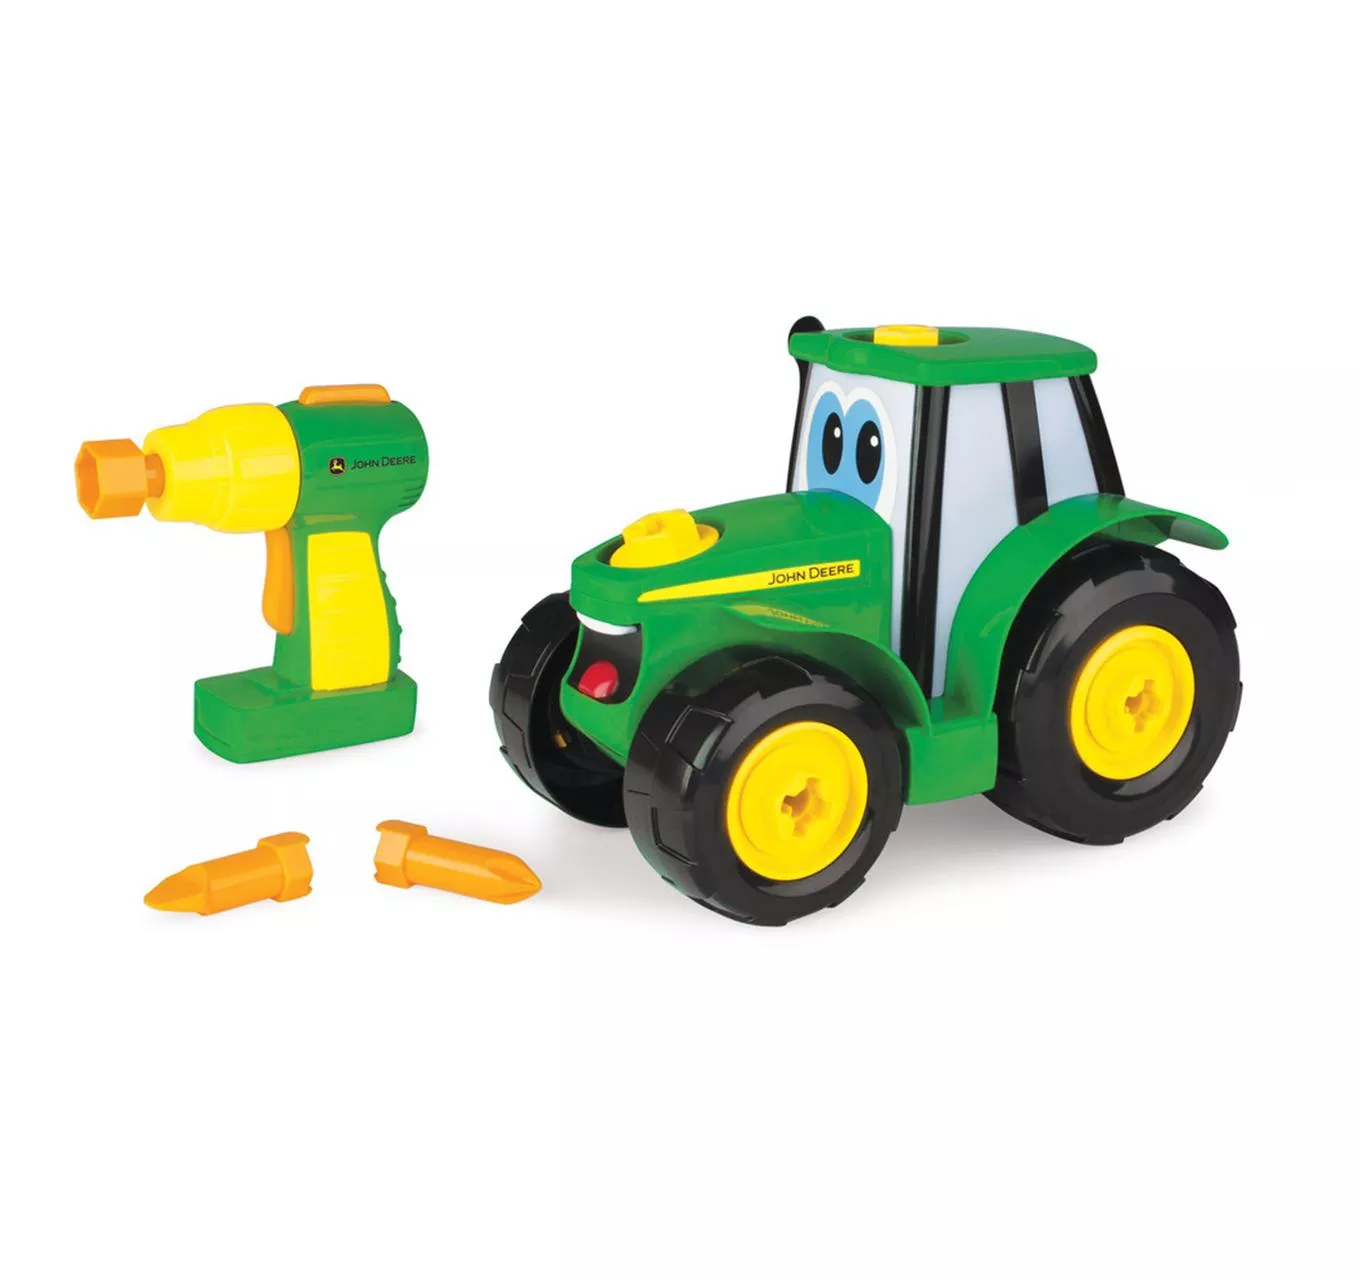 Build-A-Johnny Tractor